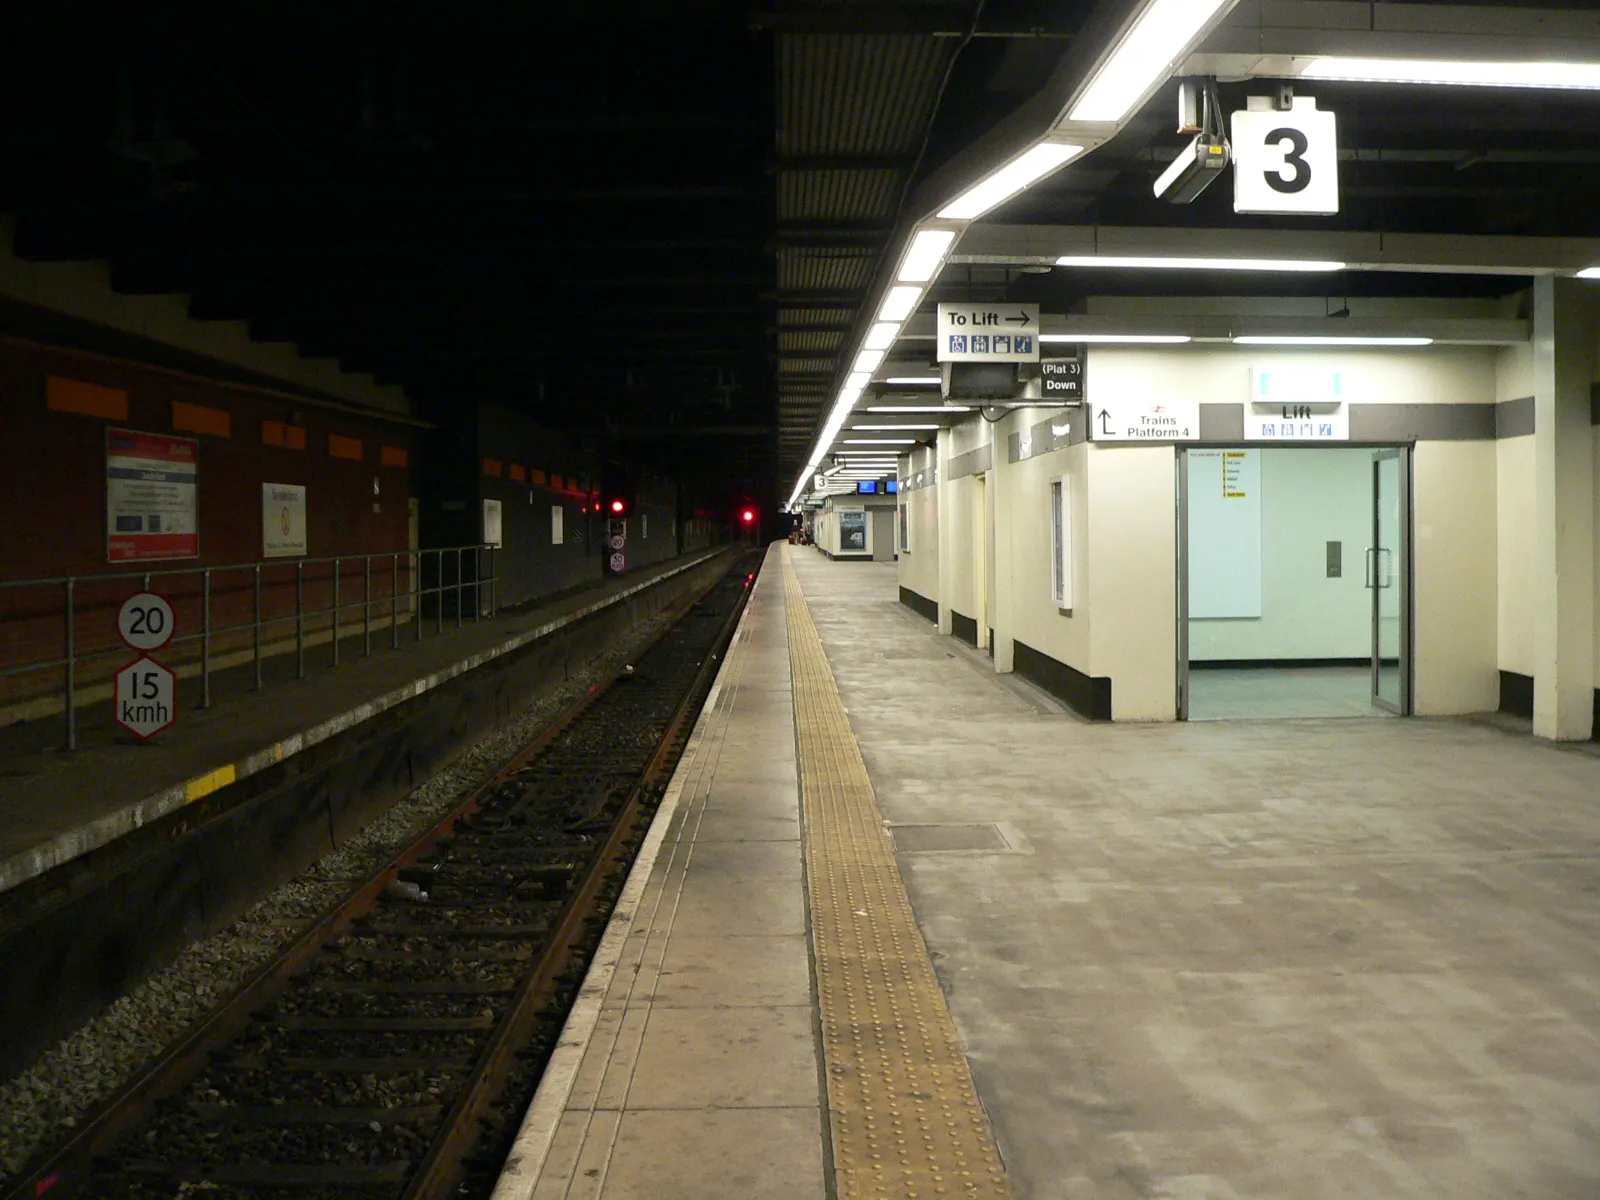 Photo showing: Sunderland station is shared between the Tyne and Wear Metro system and mainline services, platform 3 in the foreground is for Northbound Metro services to Newcastle, platform 4 in the distance (beyond the first signal) is for Northbound mainline services, also towards Newcastle.
The two numbered signs on the left of the track are speed restriction signs - the indicating the top speed for mainline trains is 20mph, while the lower one restricts Metro services to 15km/h.